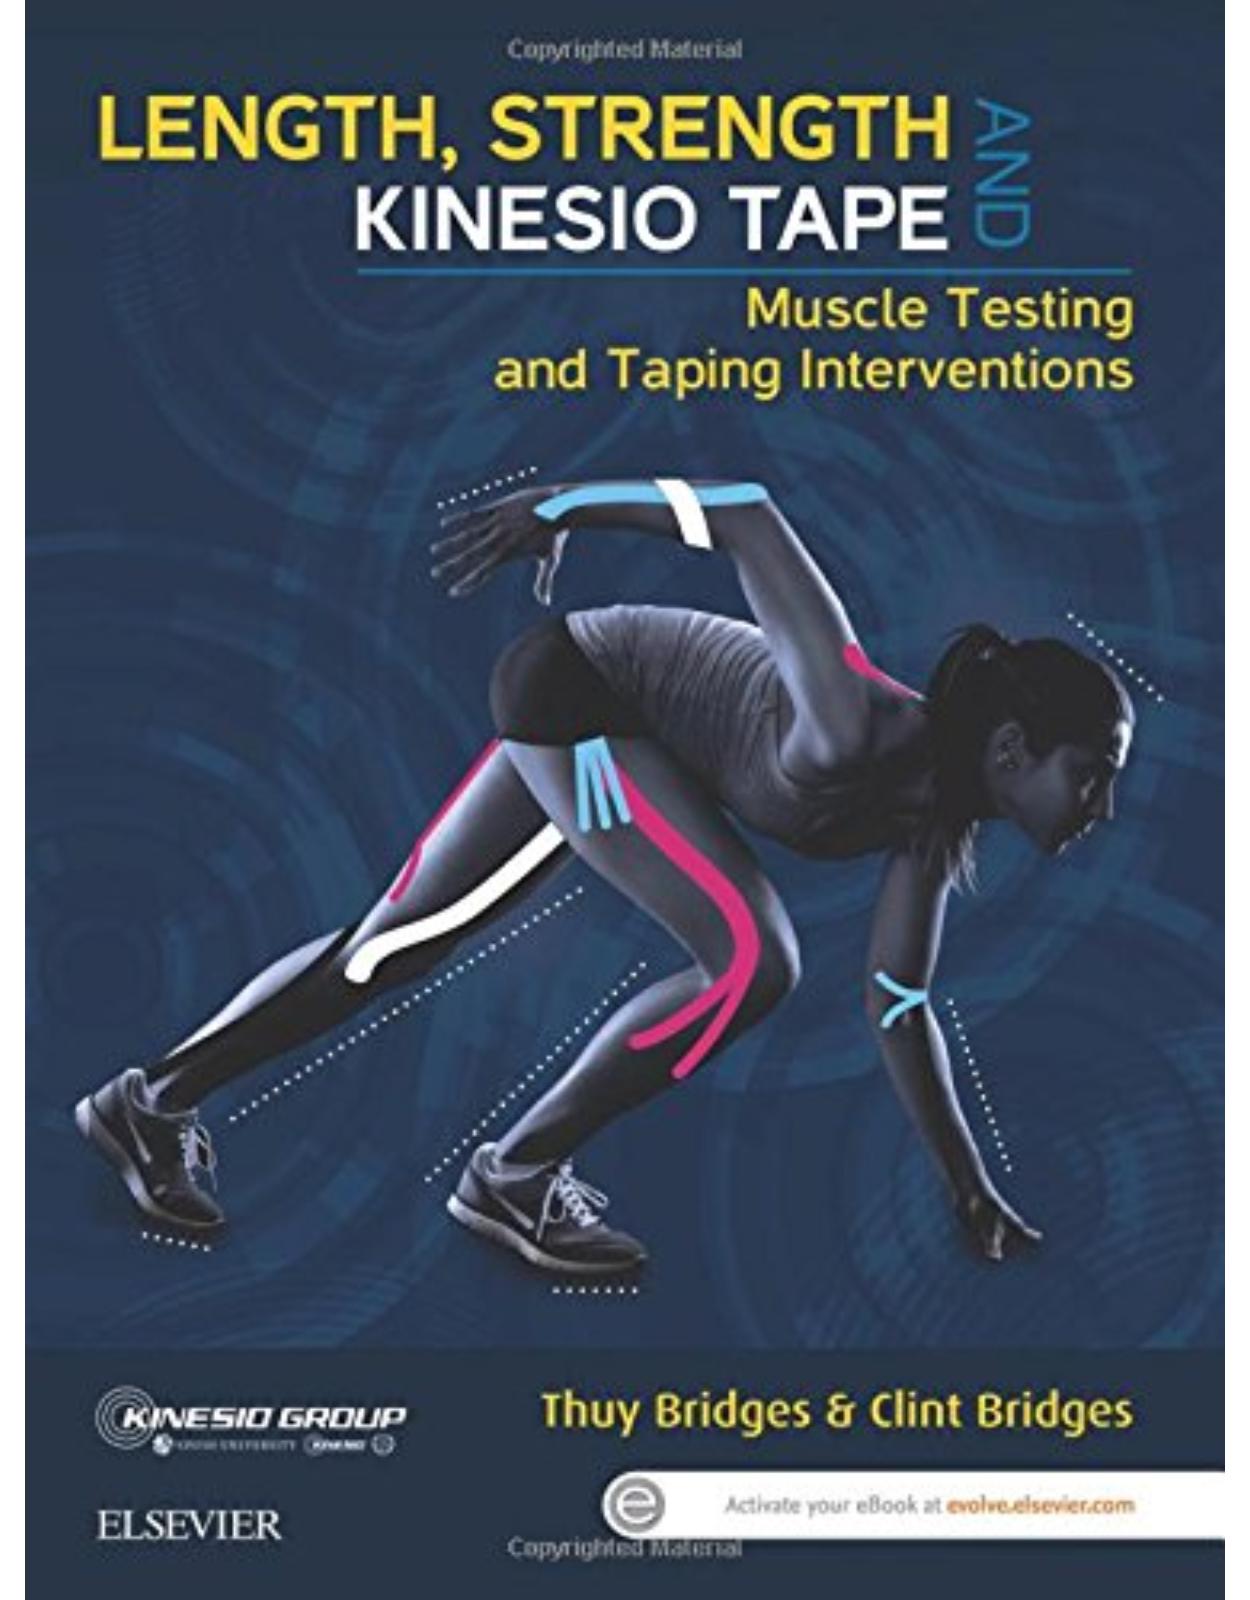 Length, Strength and Kinesio Tape: Muscle Testing and Taping Interventions, 1e